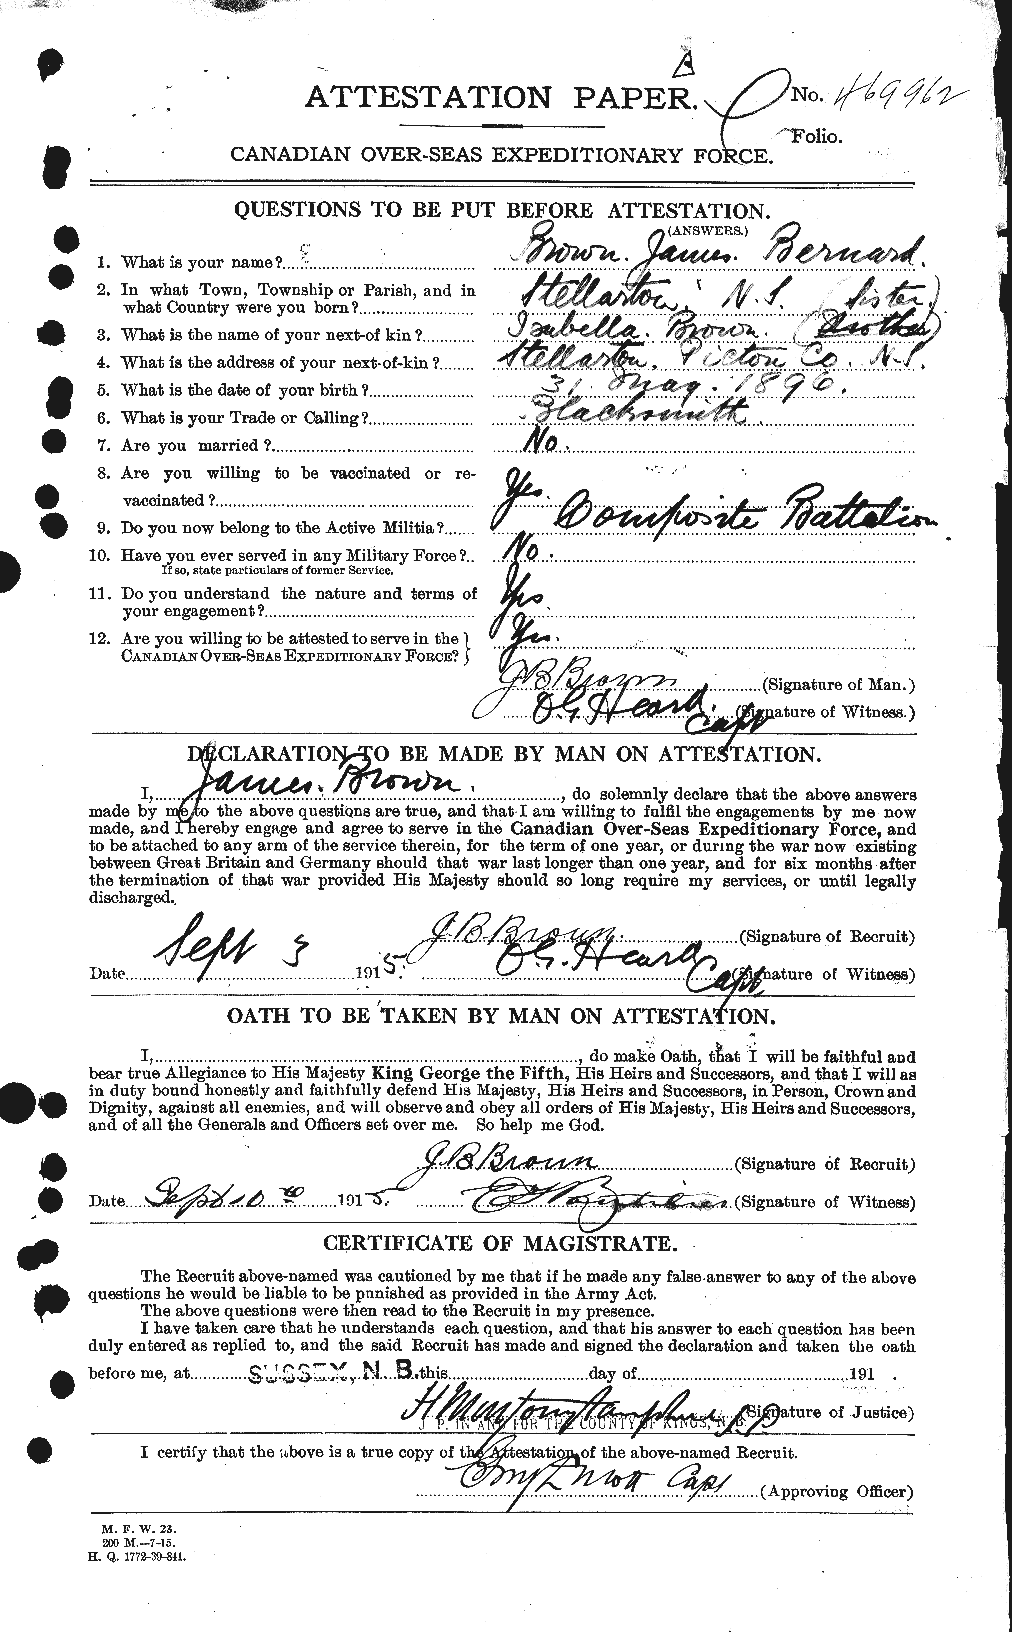 Personnel Records of the First World War - CEF 265798a